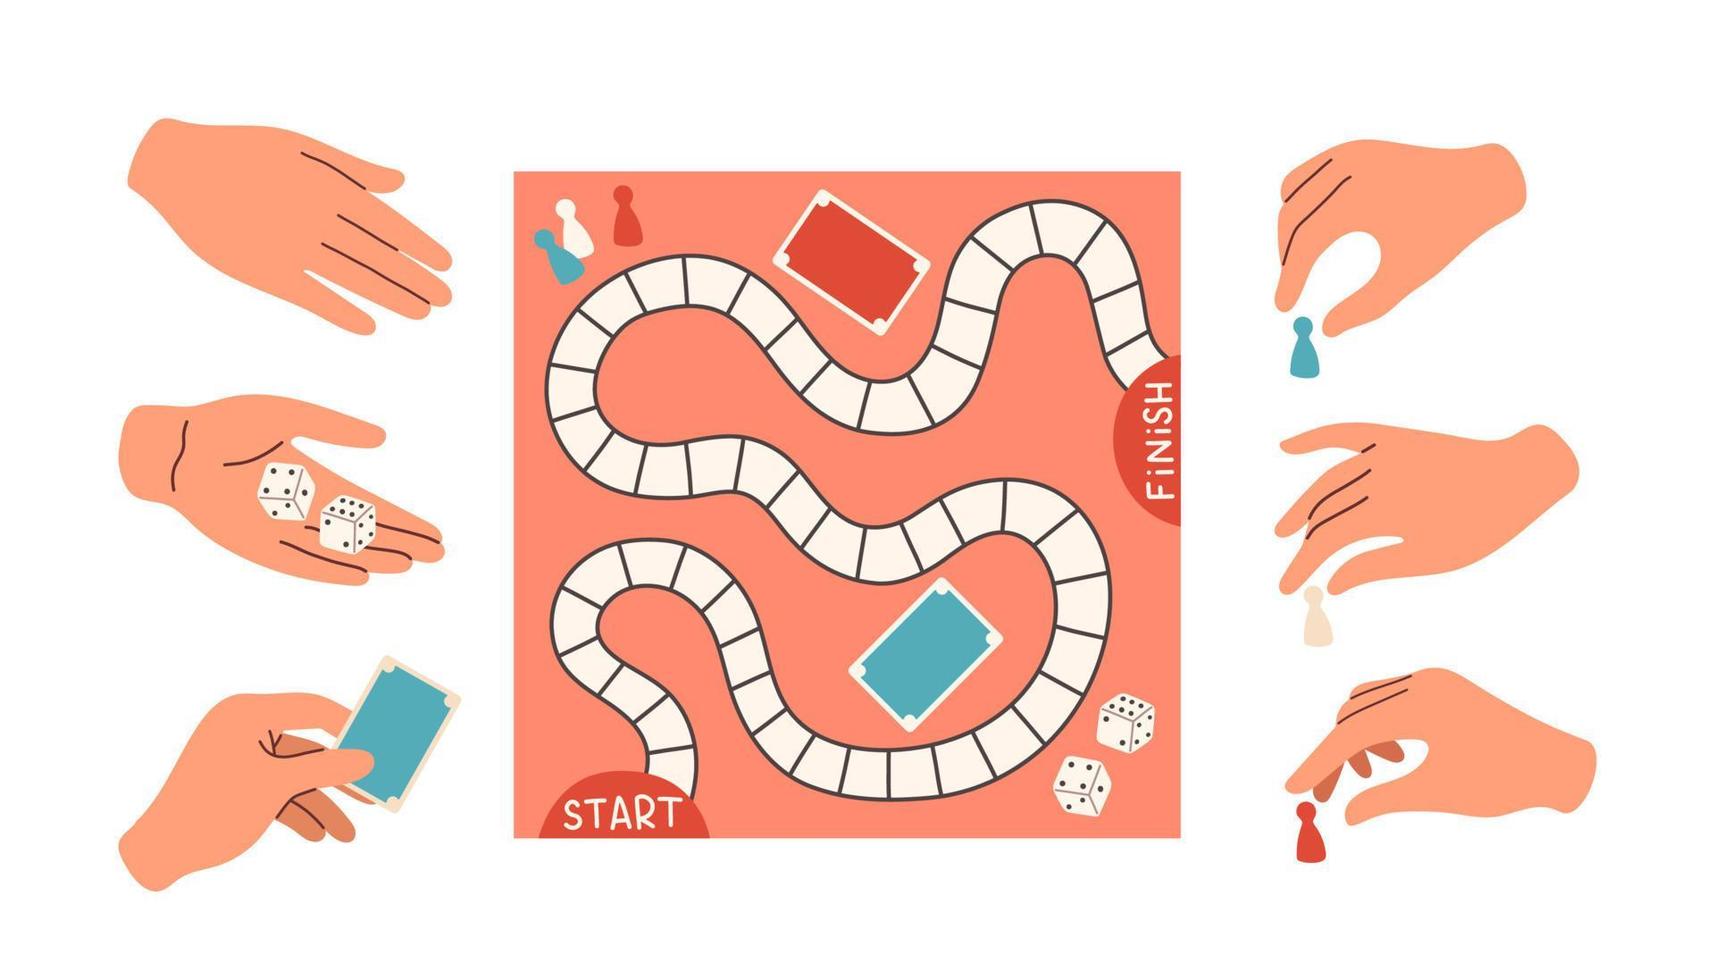 Group of people playing together with a board game. Vector illustration